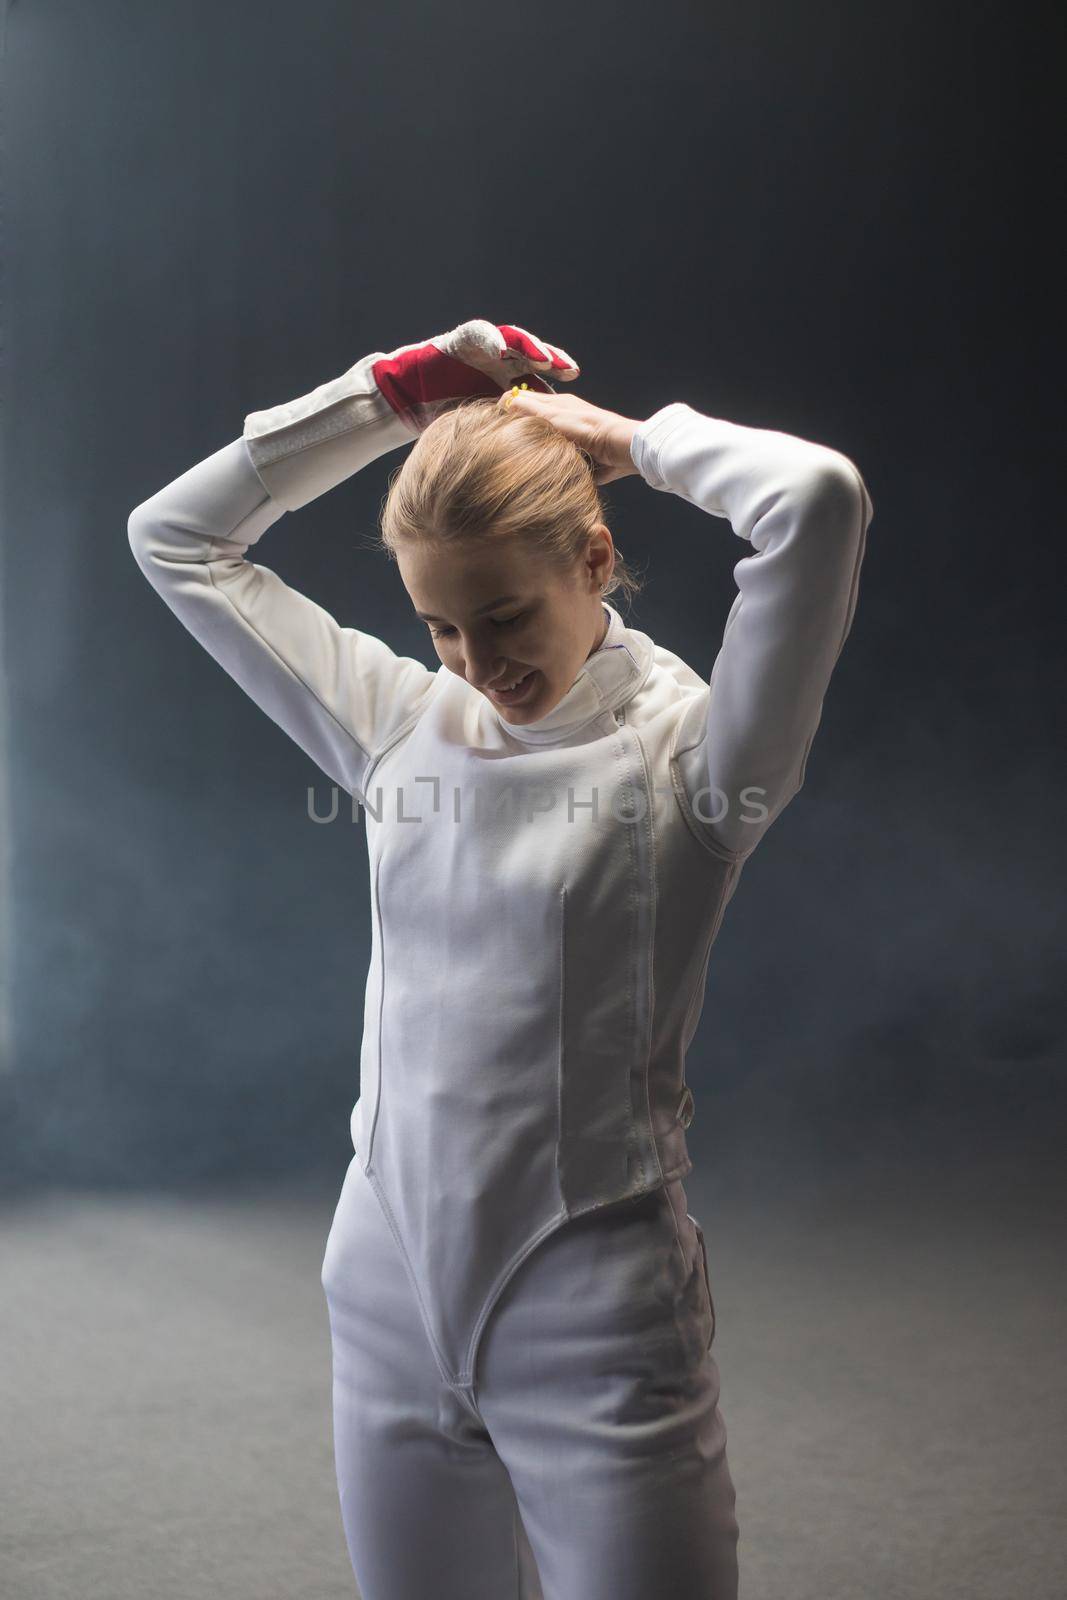 A young woman fencer putting her hair up into a bun before the training. Mid shot